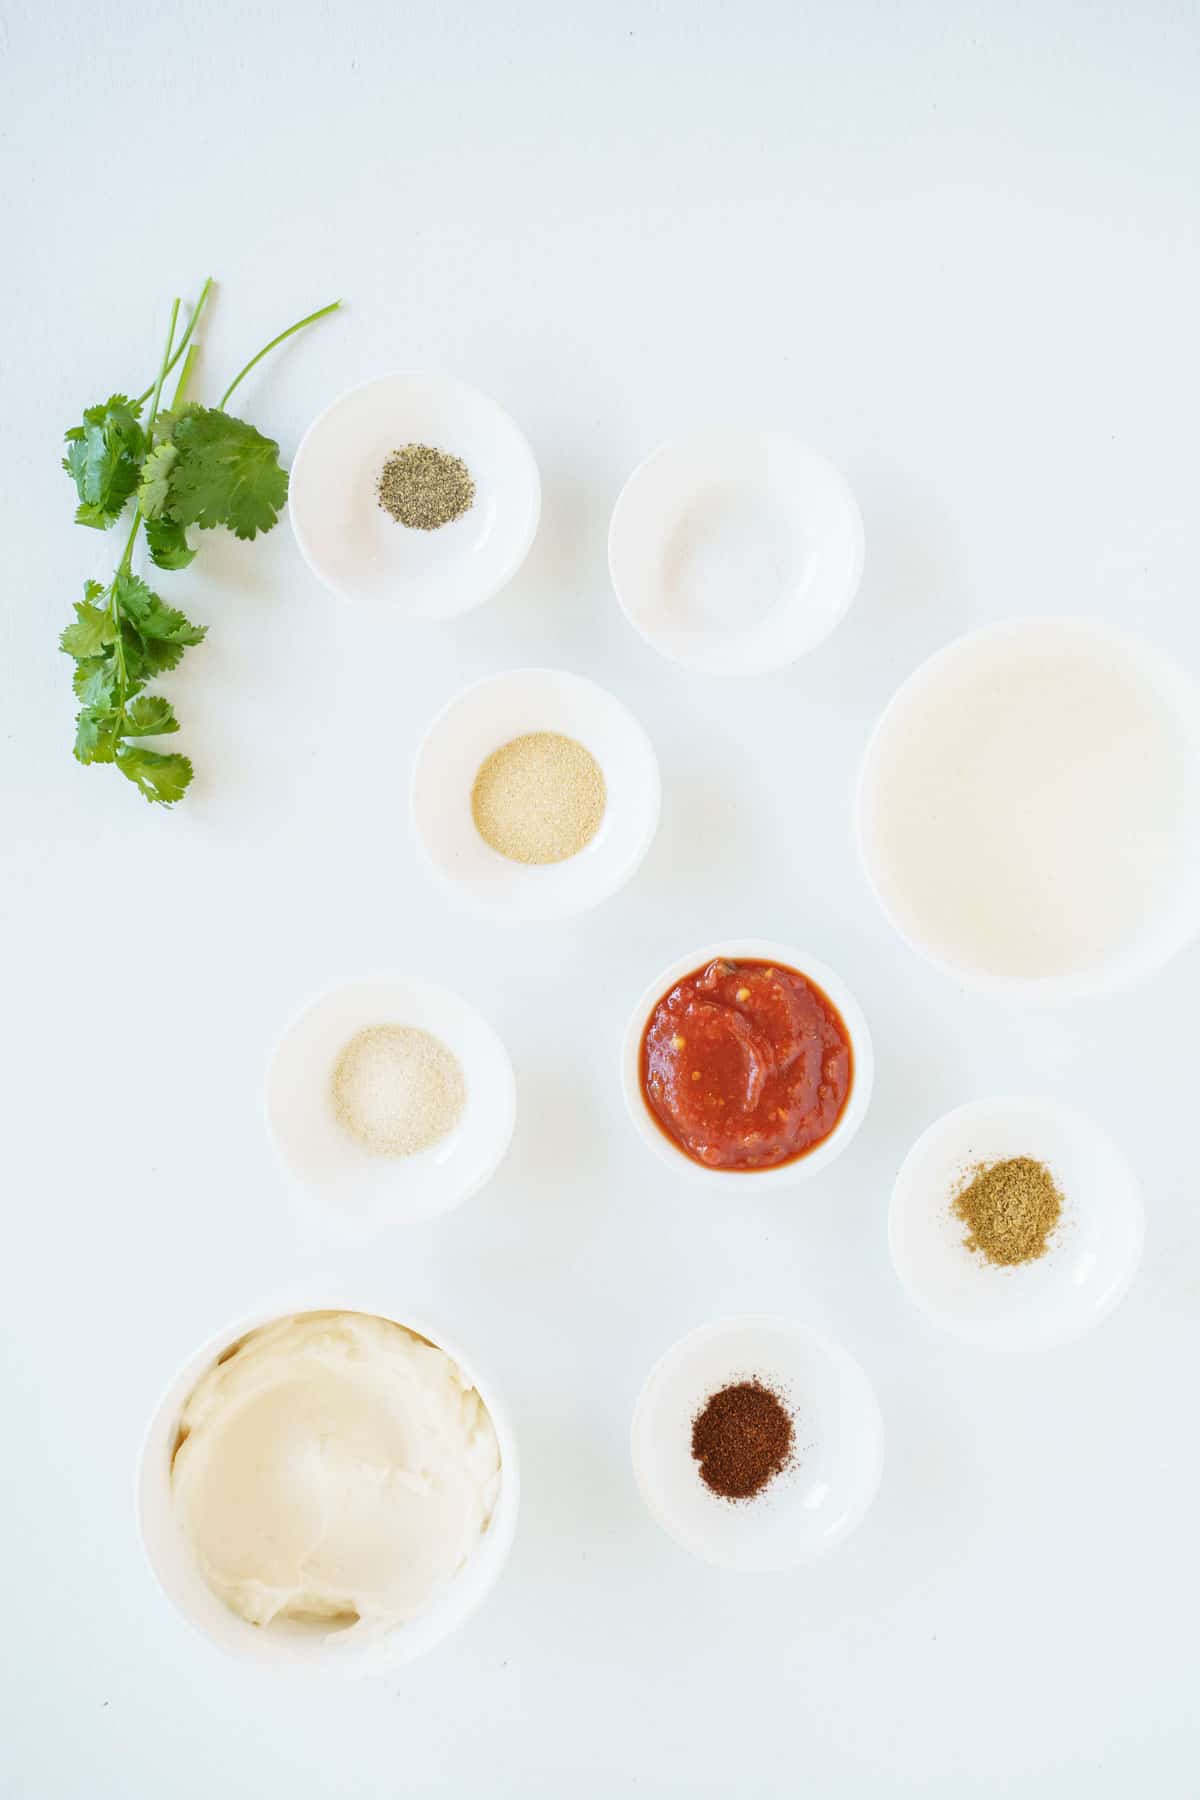 Bowls of Salsa, Cream, Cumin and the Rest of the Dressing Ingredients on a White Countertop